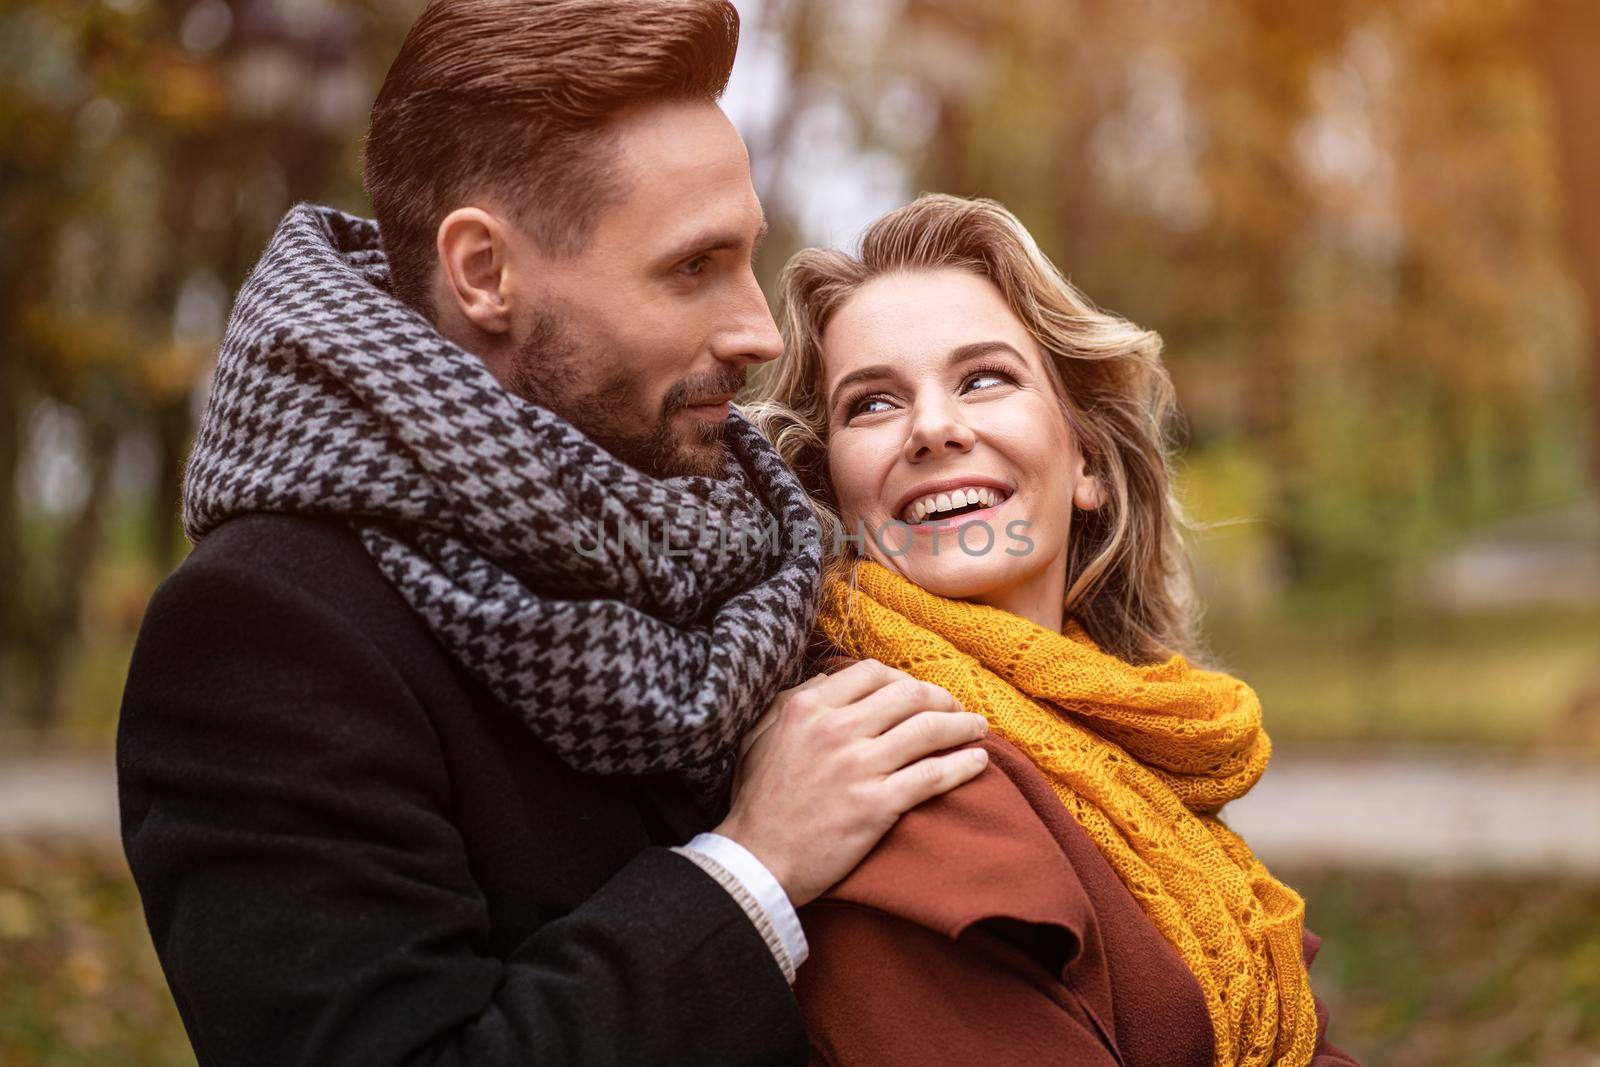 Close up. Happy in love young people, man hugging woman from behind when she looks at him, happy couple walking in a autumn park wearing stylish coats and picking up fallen leaves by LipikStockMedia